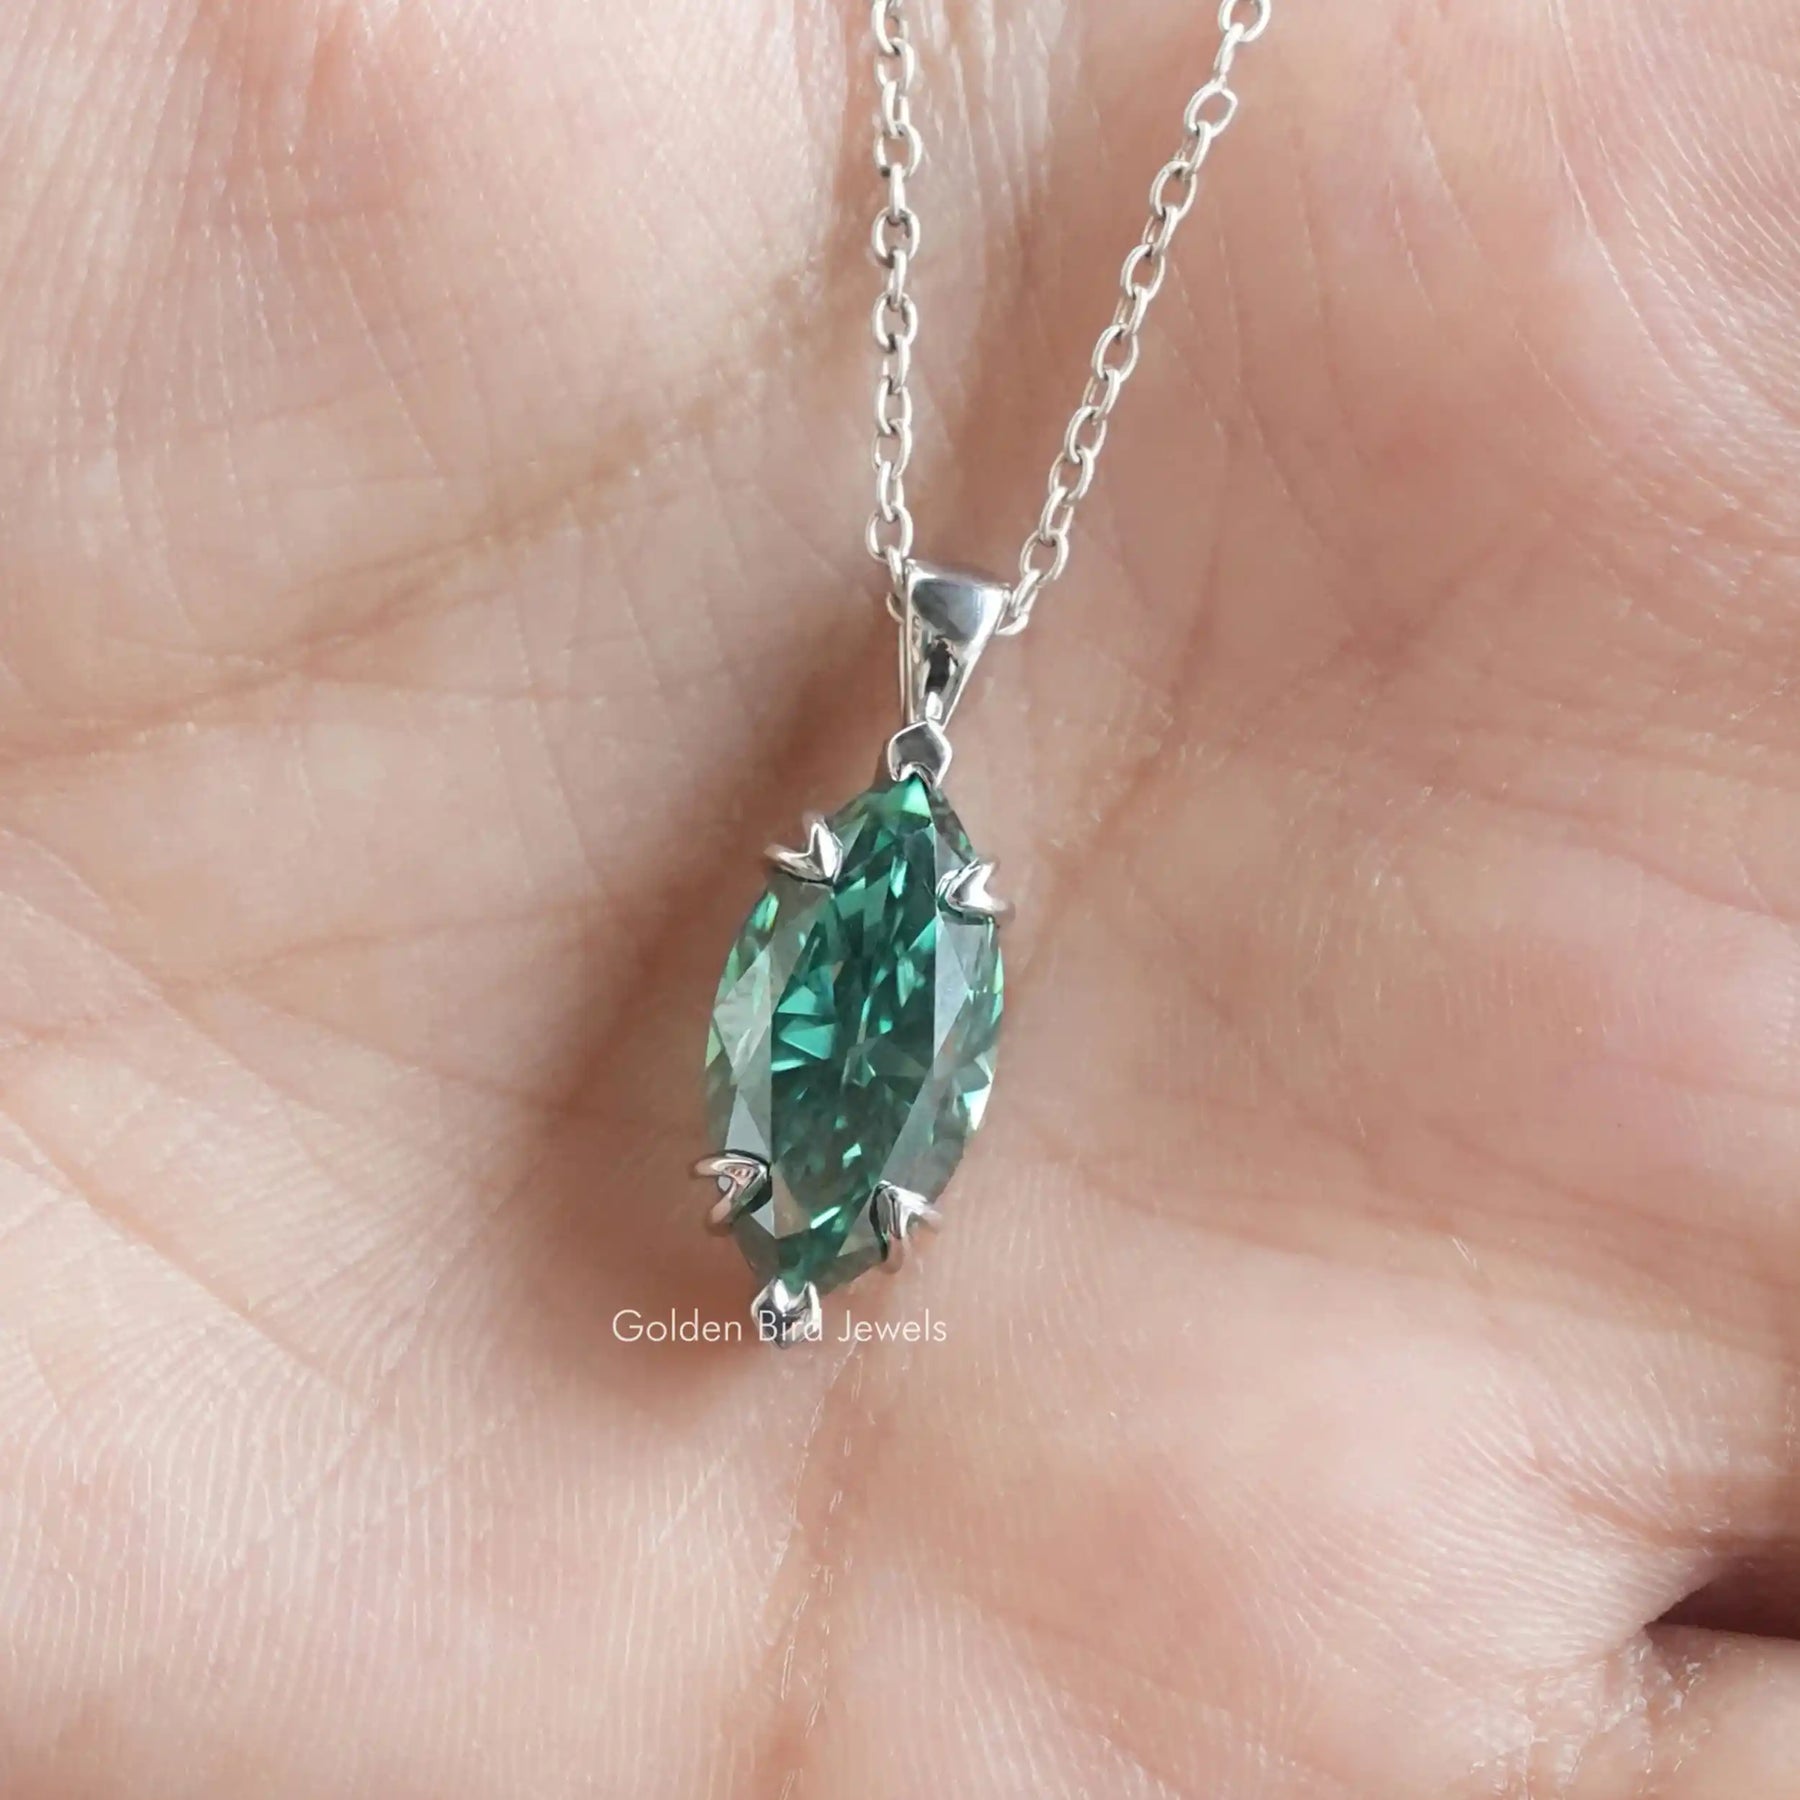 [Green marquise pendant set in prong setting]-[Golden Bird Jewels]